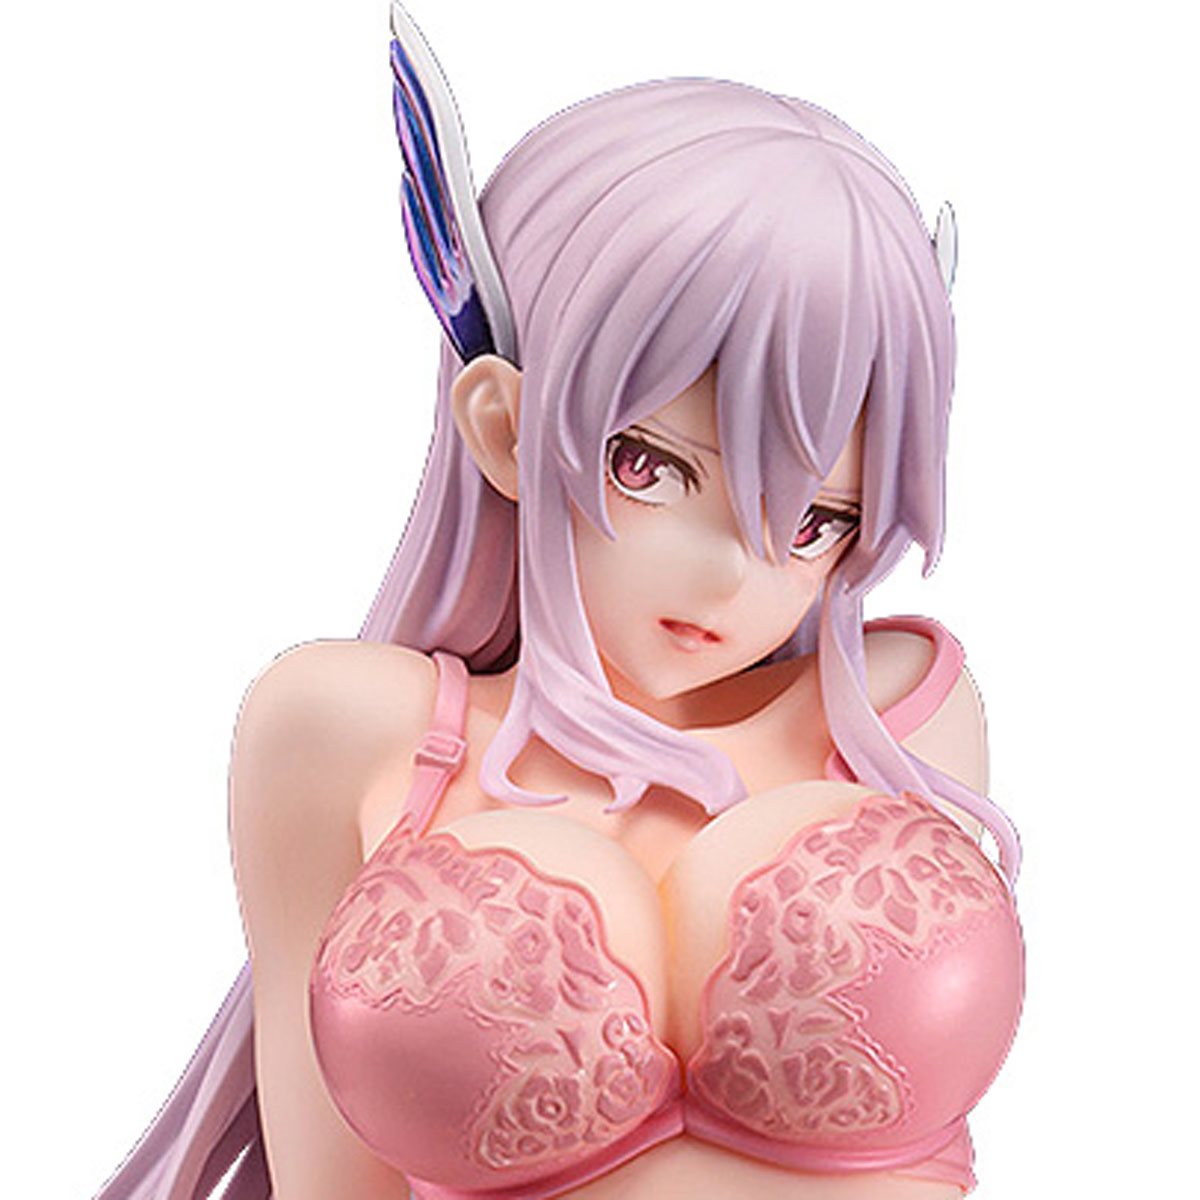 Chained Soldier - Kyoka Uzen 1/7th Scale Figure Pony Canyon Lingerie Style